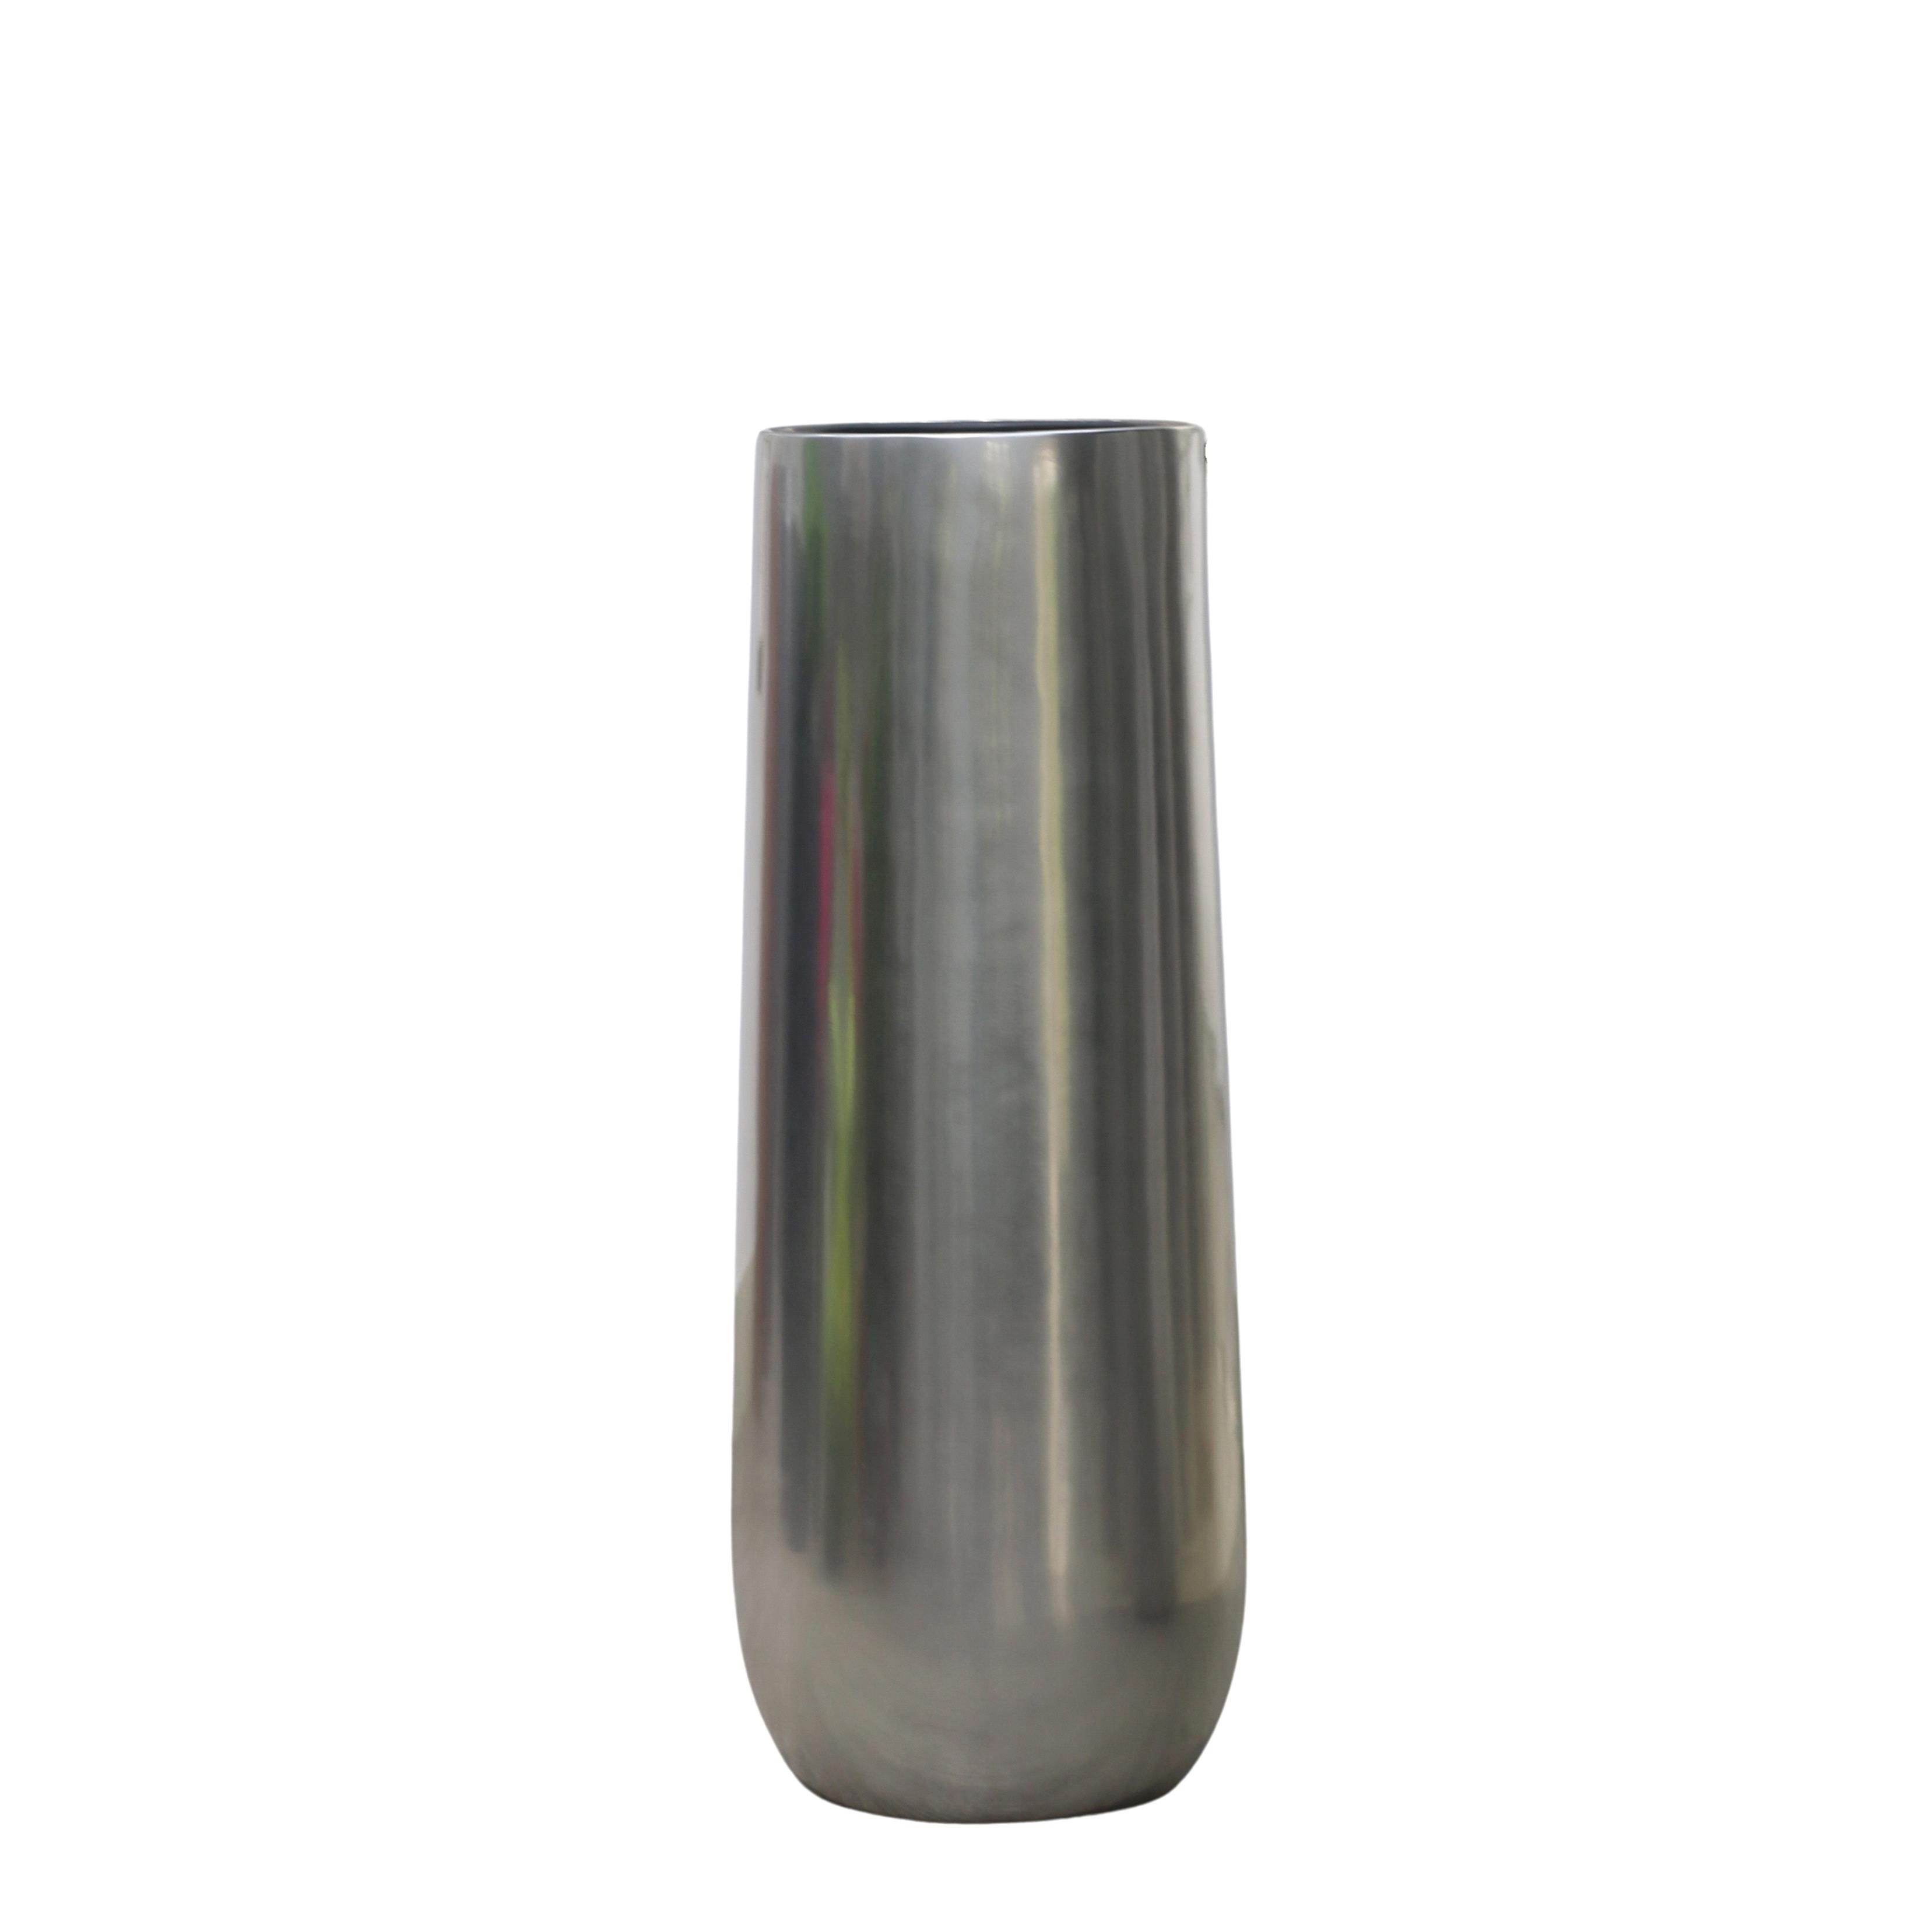 Home decors and accessories, Vases in resin n cement, VASO CILINDRICO D.38XH.80 CM